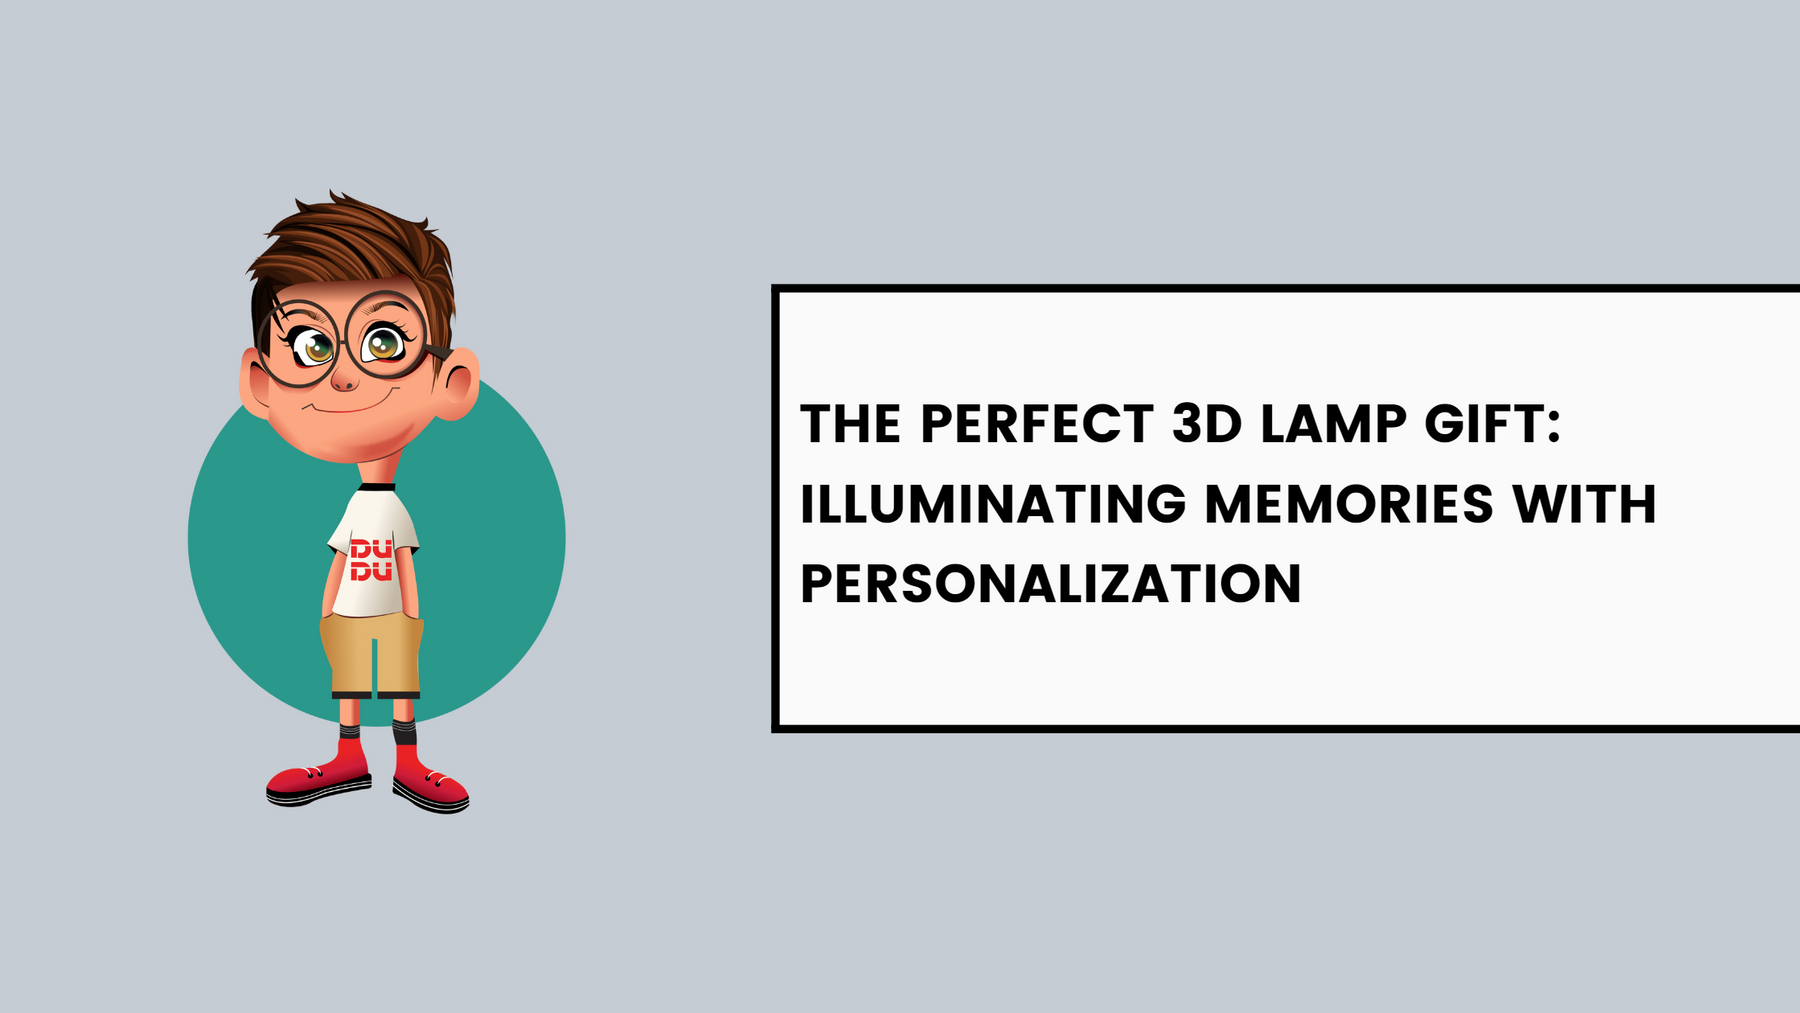 The Perfect 3D Lamp Gift: Illuminating Memories with Personalization